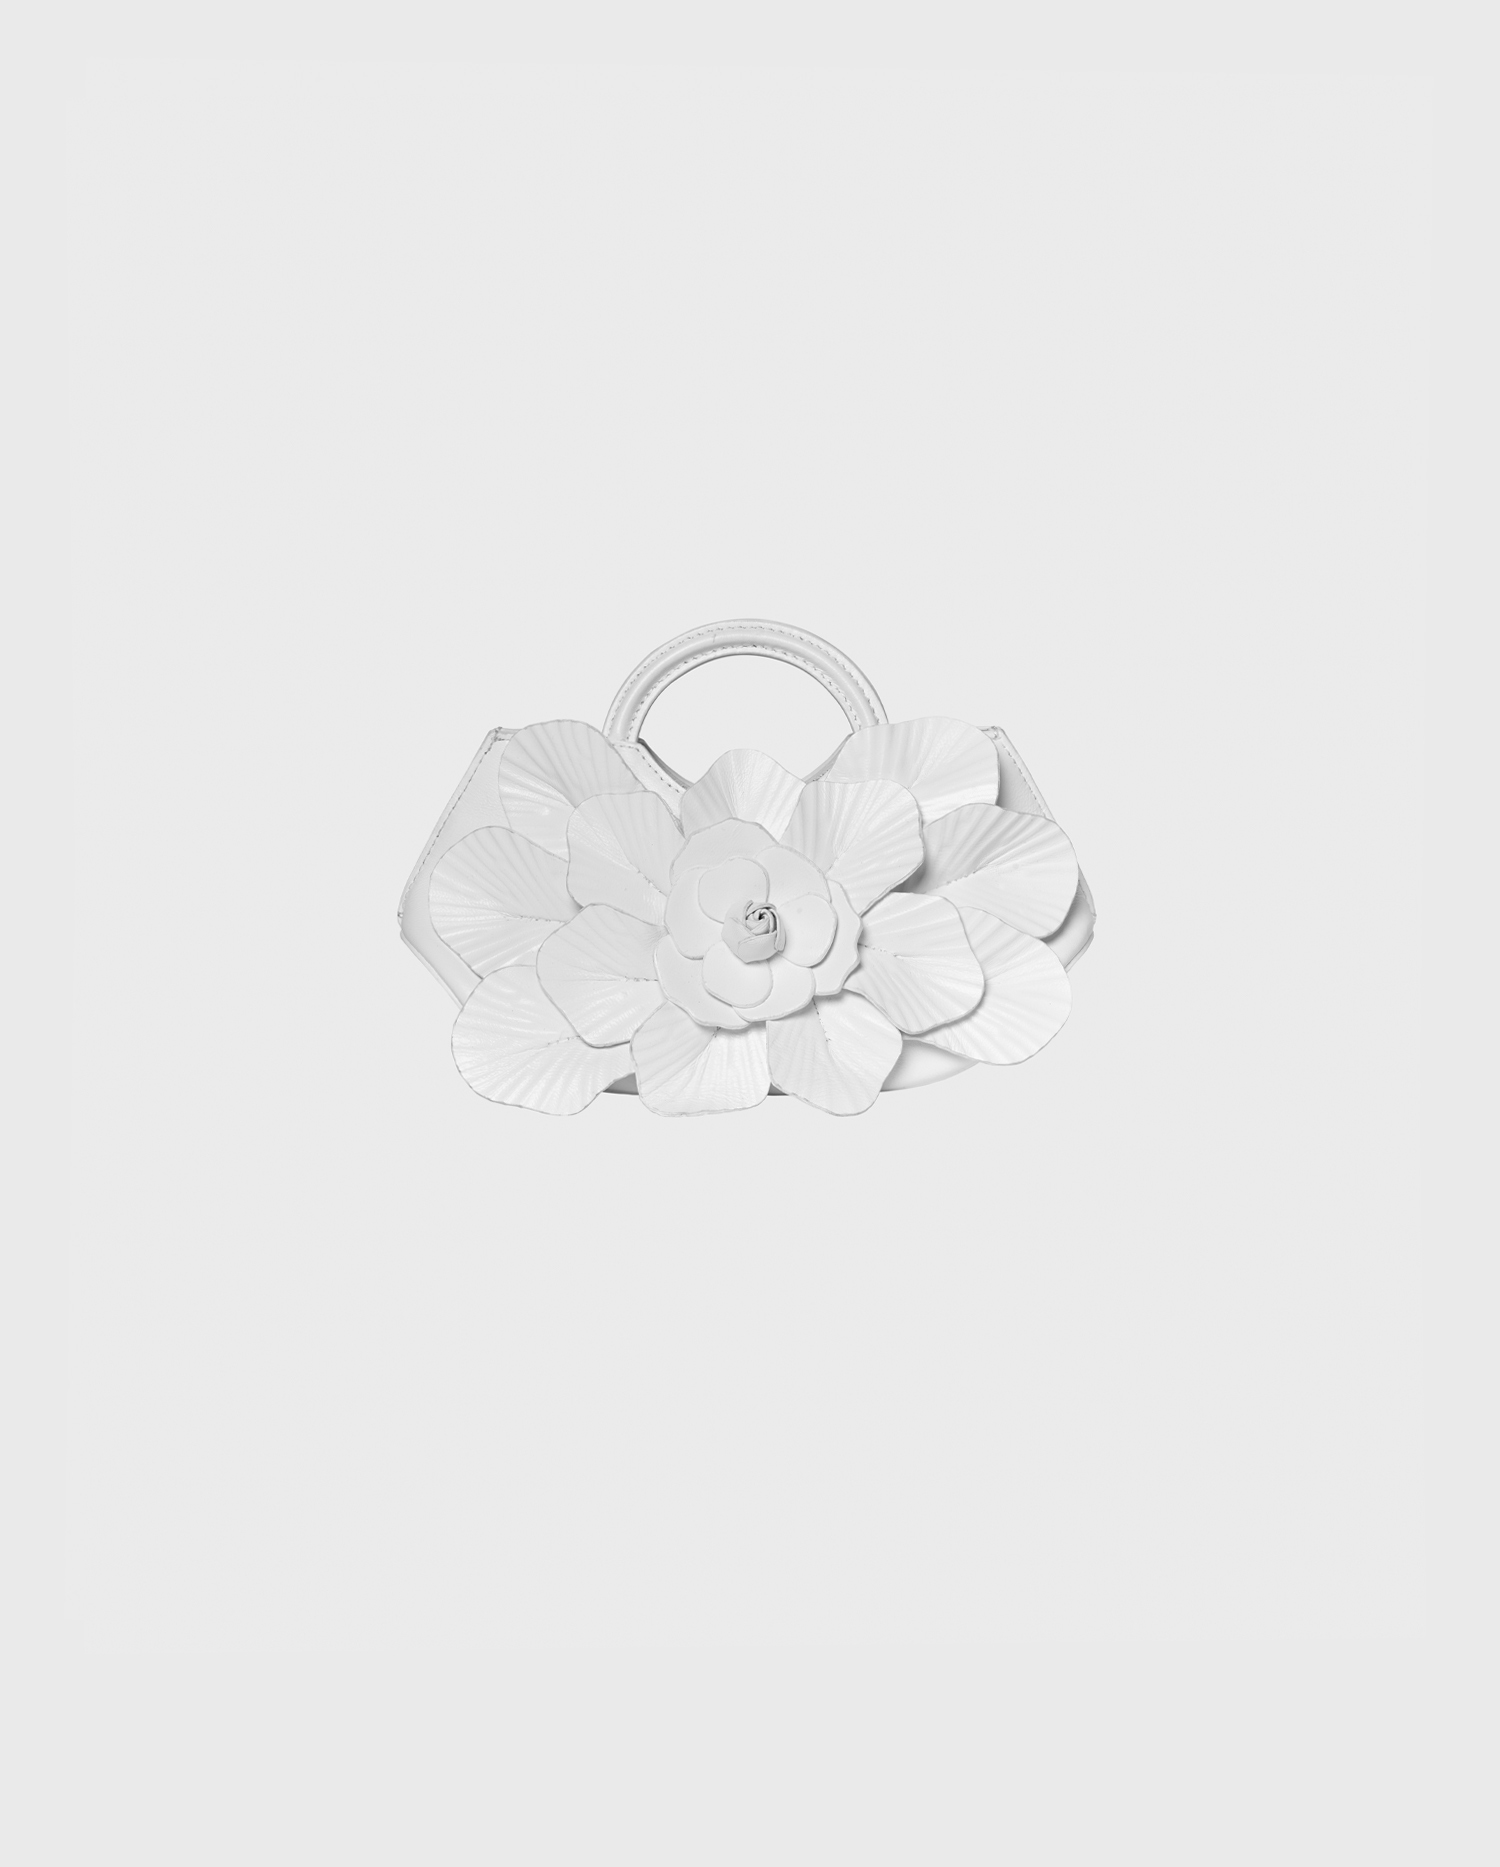 Discover the SCARLETT Signature Leather Mini Floral Handbag in White from ANNE FONTAINE